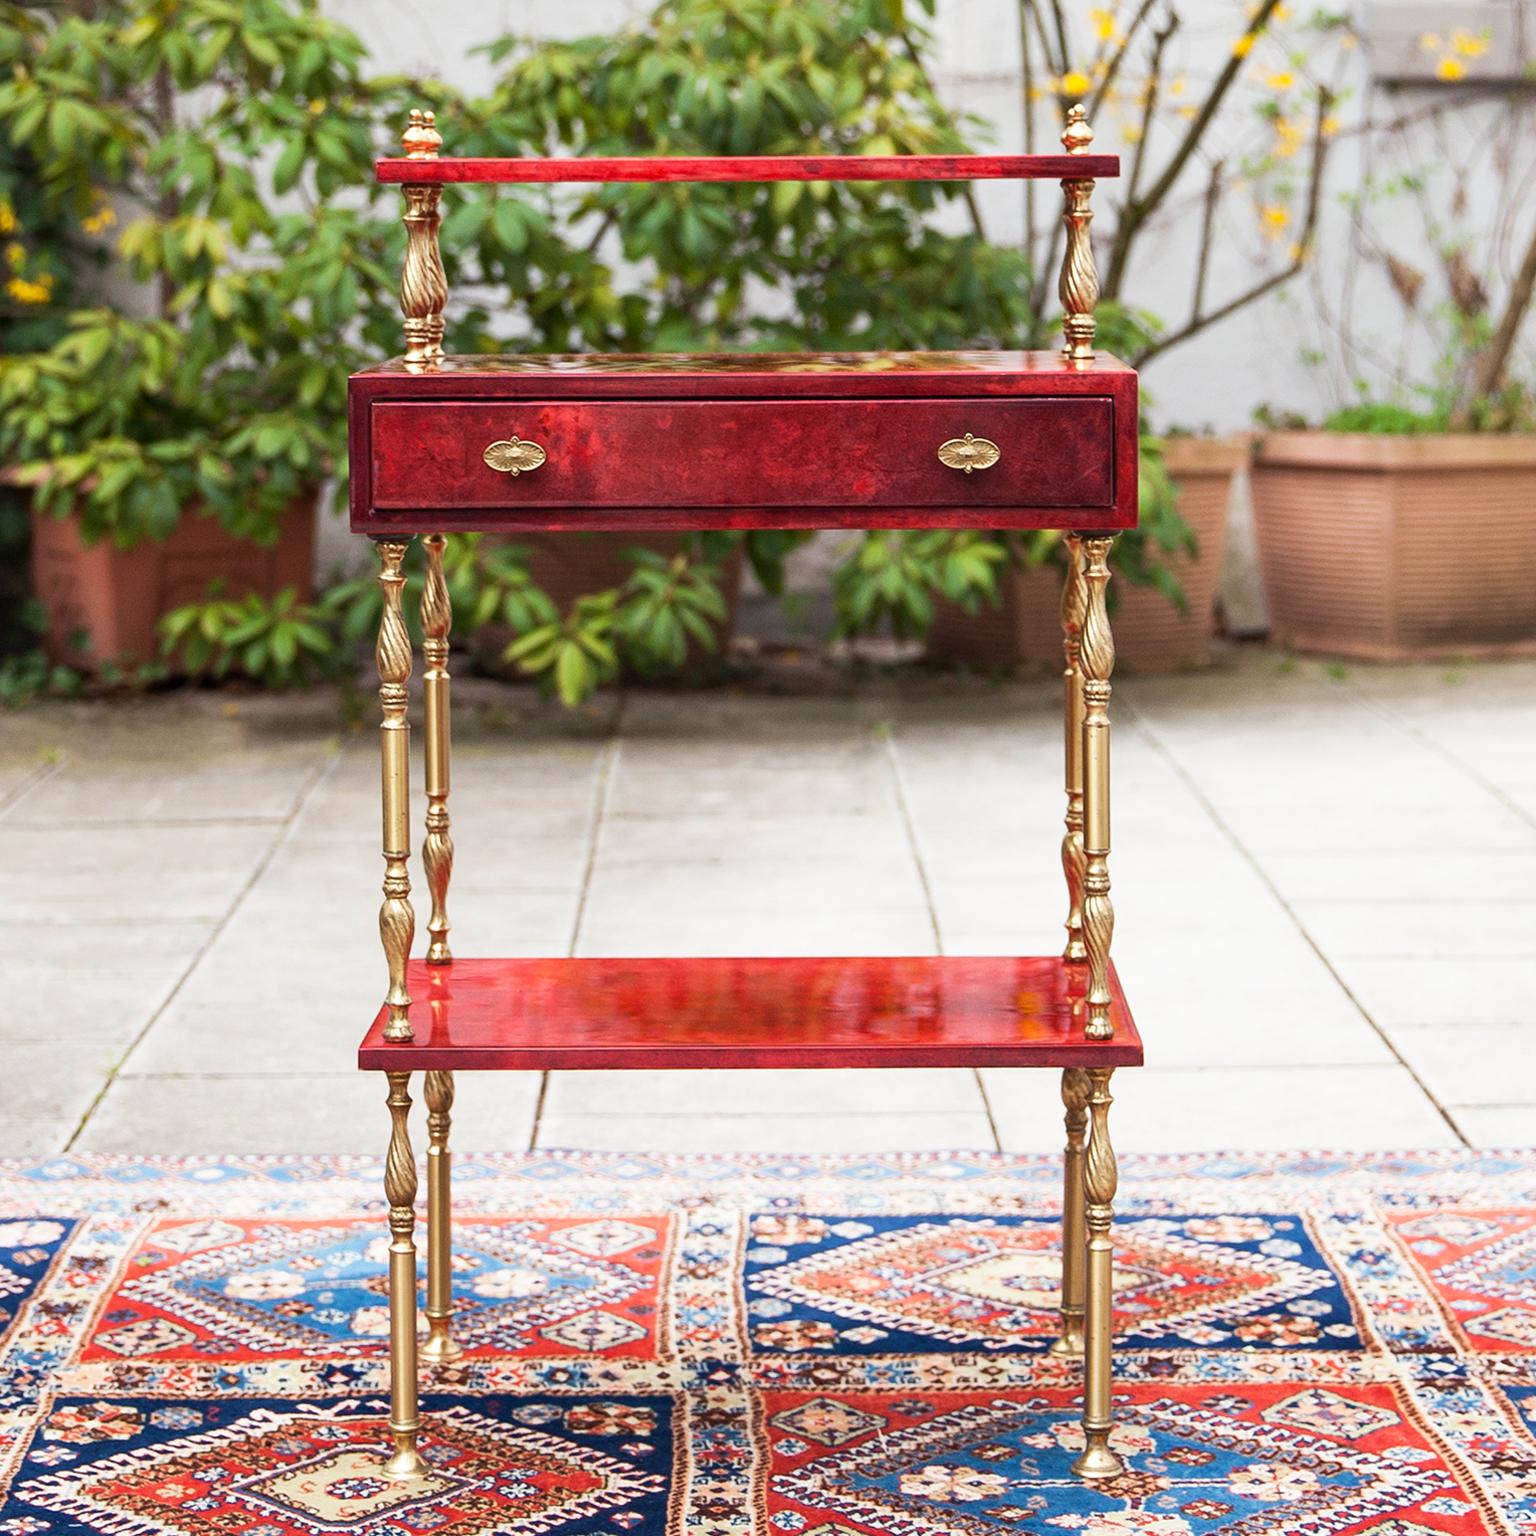 Aldo Tura red goatskin parchment side table or night stand with one drawer. This wonderful elegant piece of Italian living culture consisting to three levels and a drawer. Nice brass details.
This particular table was executed, circa 1960 and is in